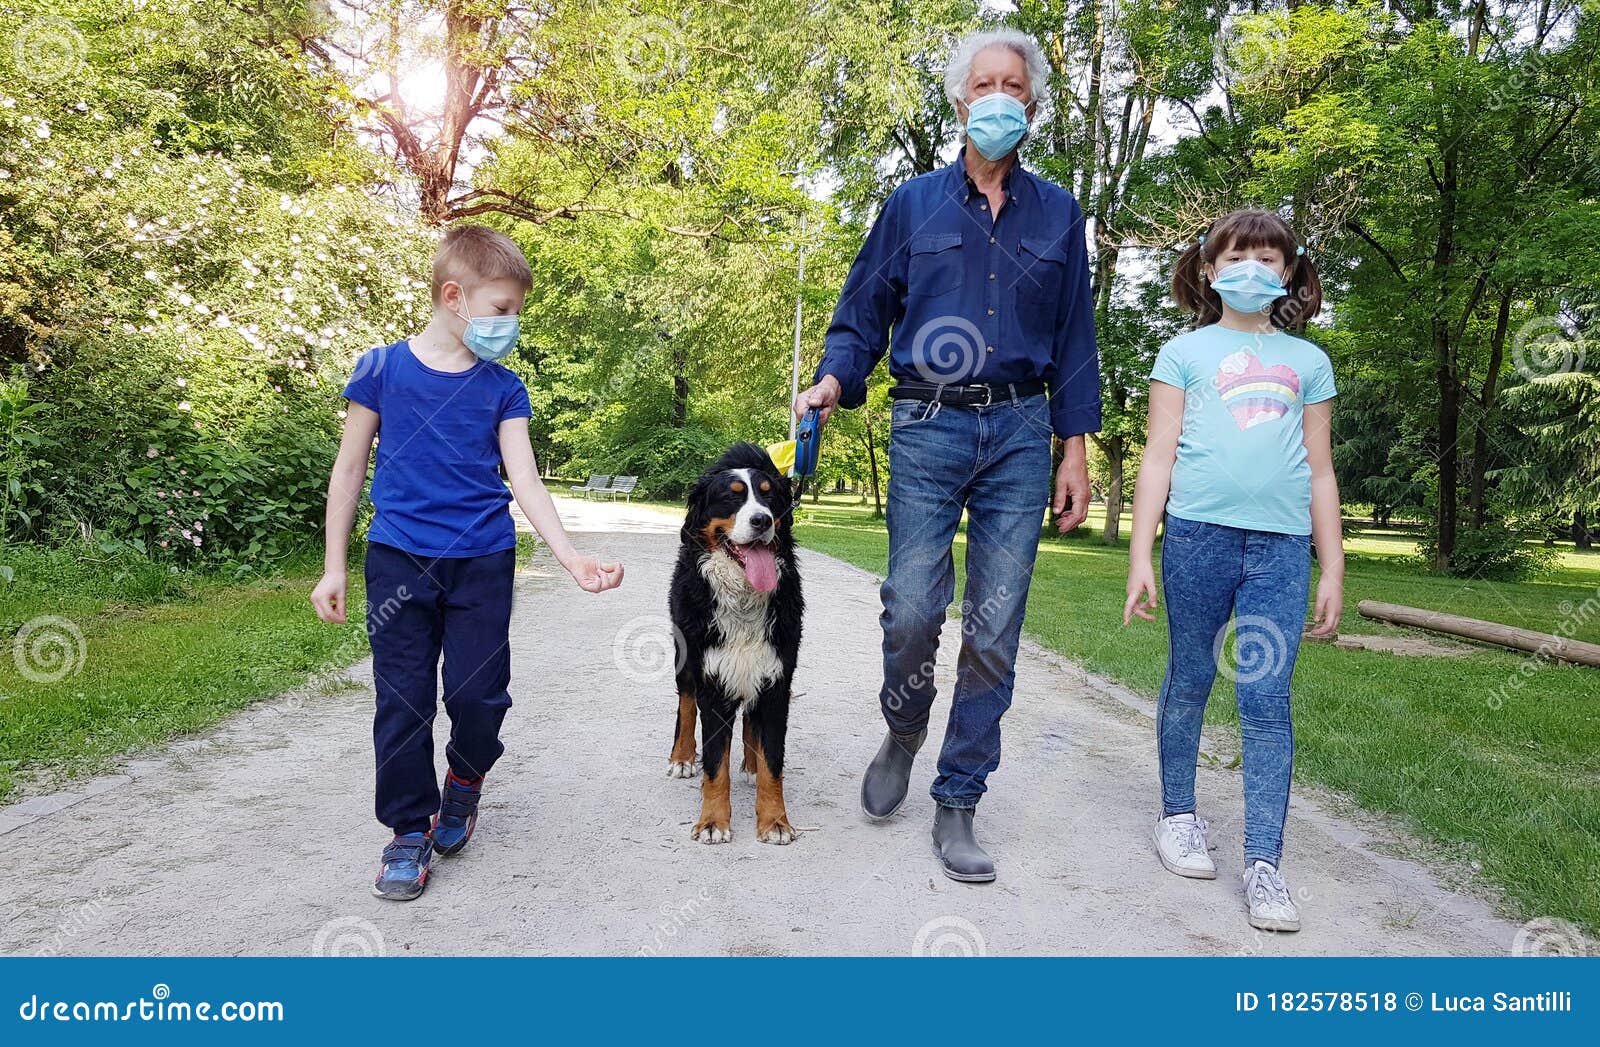 a grandfather and grandson are walking in the park with the dog during coronavirus pandemia